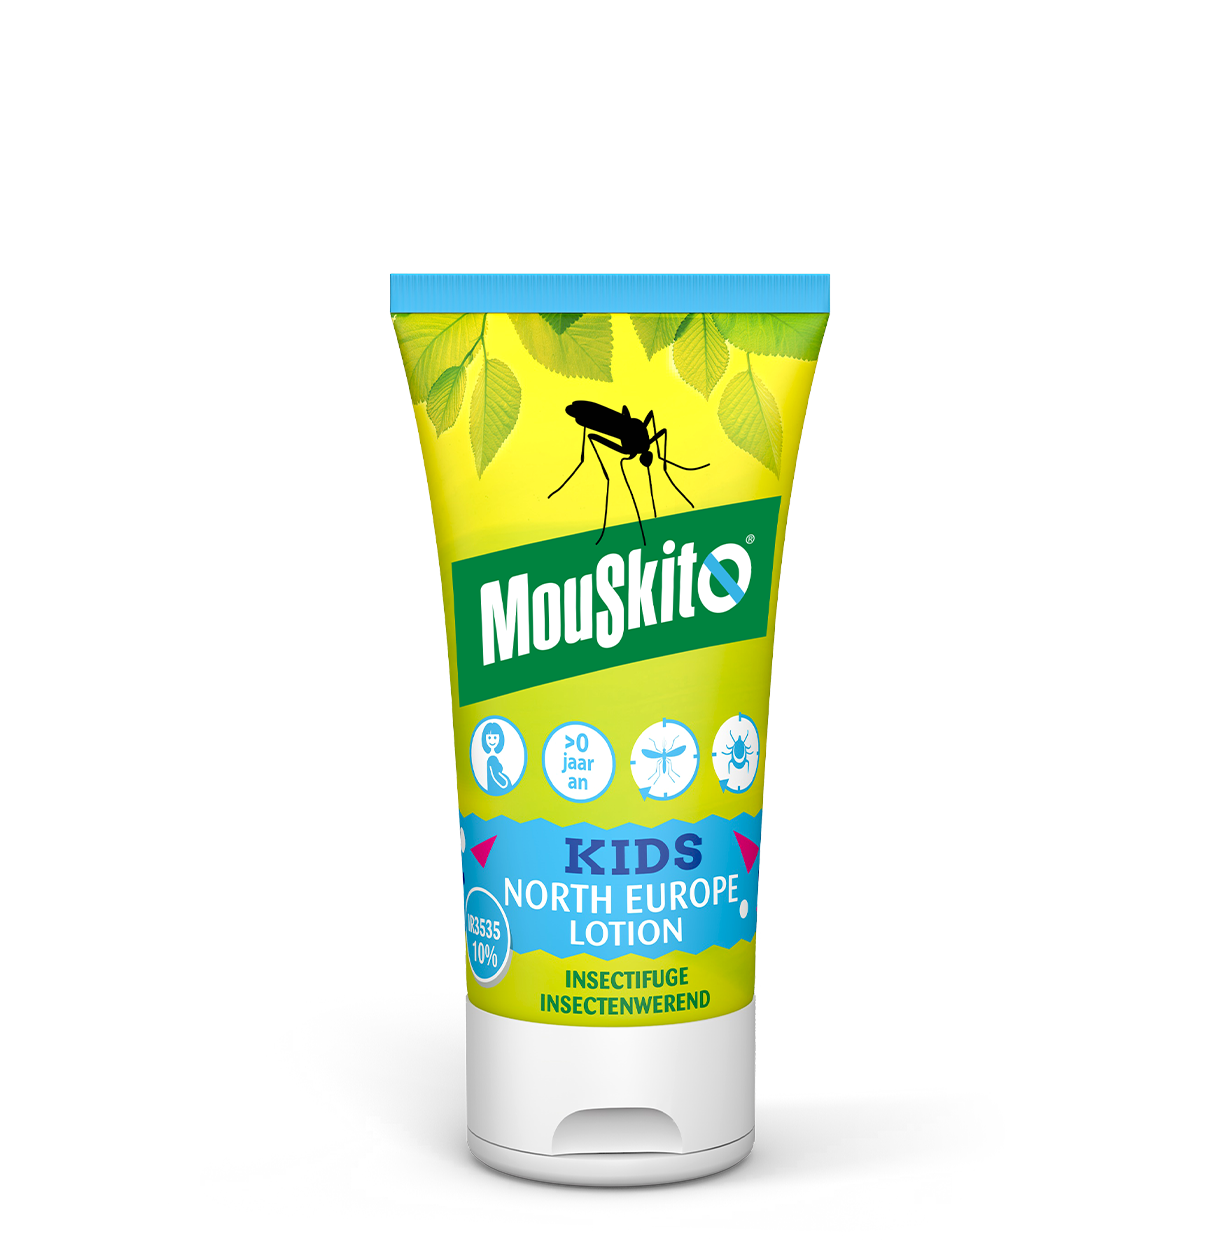 Mouskito® North Europe Kids Lotion